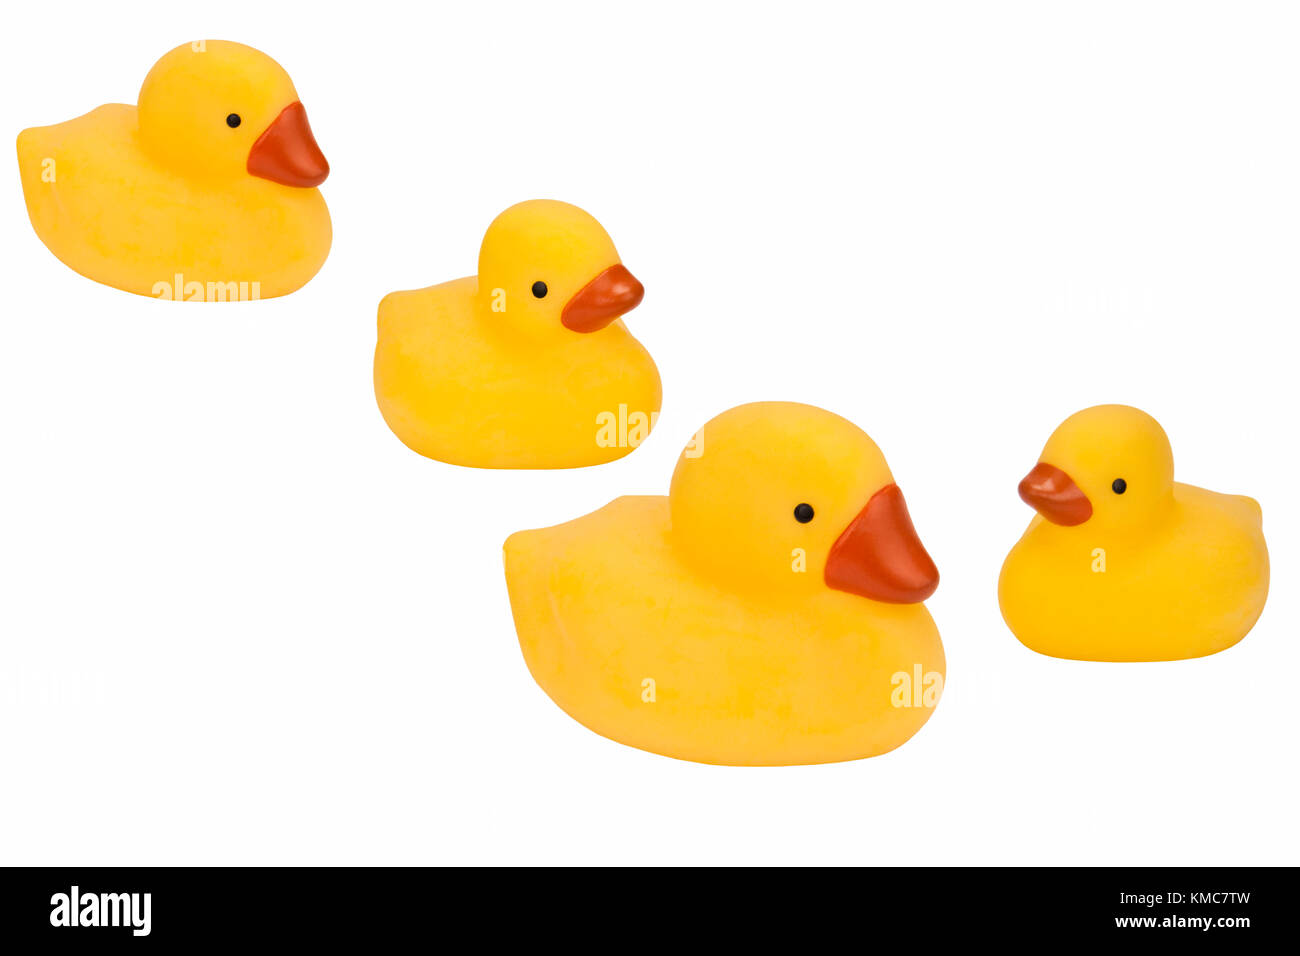 Family of Rubber Ducks - Isolated Stock Photo